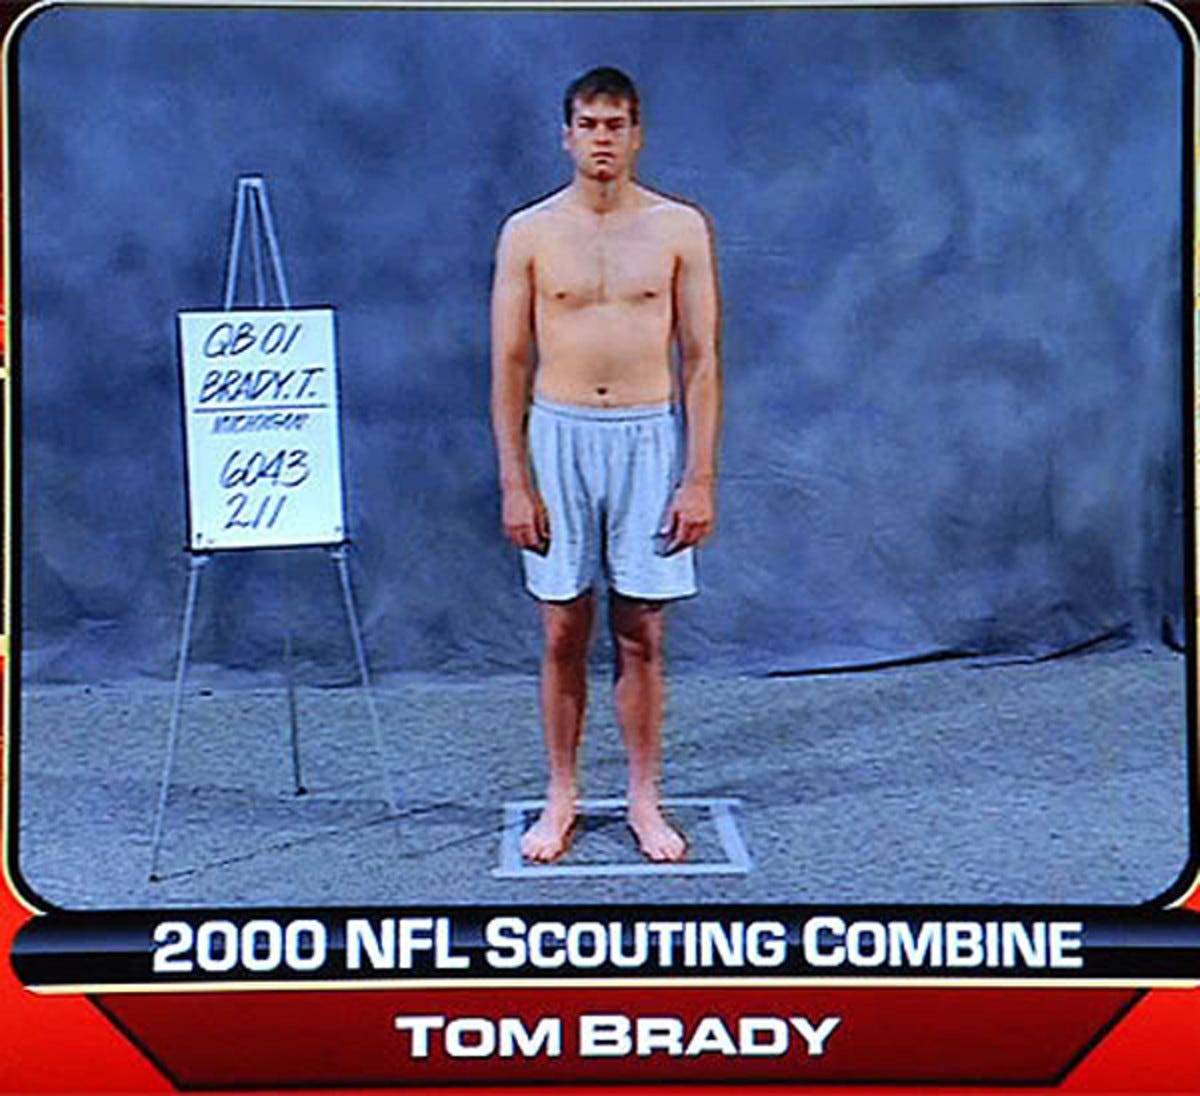 Here's A Pic Of Tom Brady Shirtless At The 2000 NFL ...